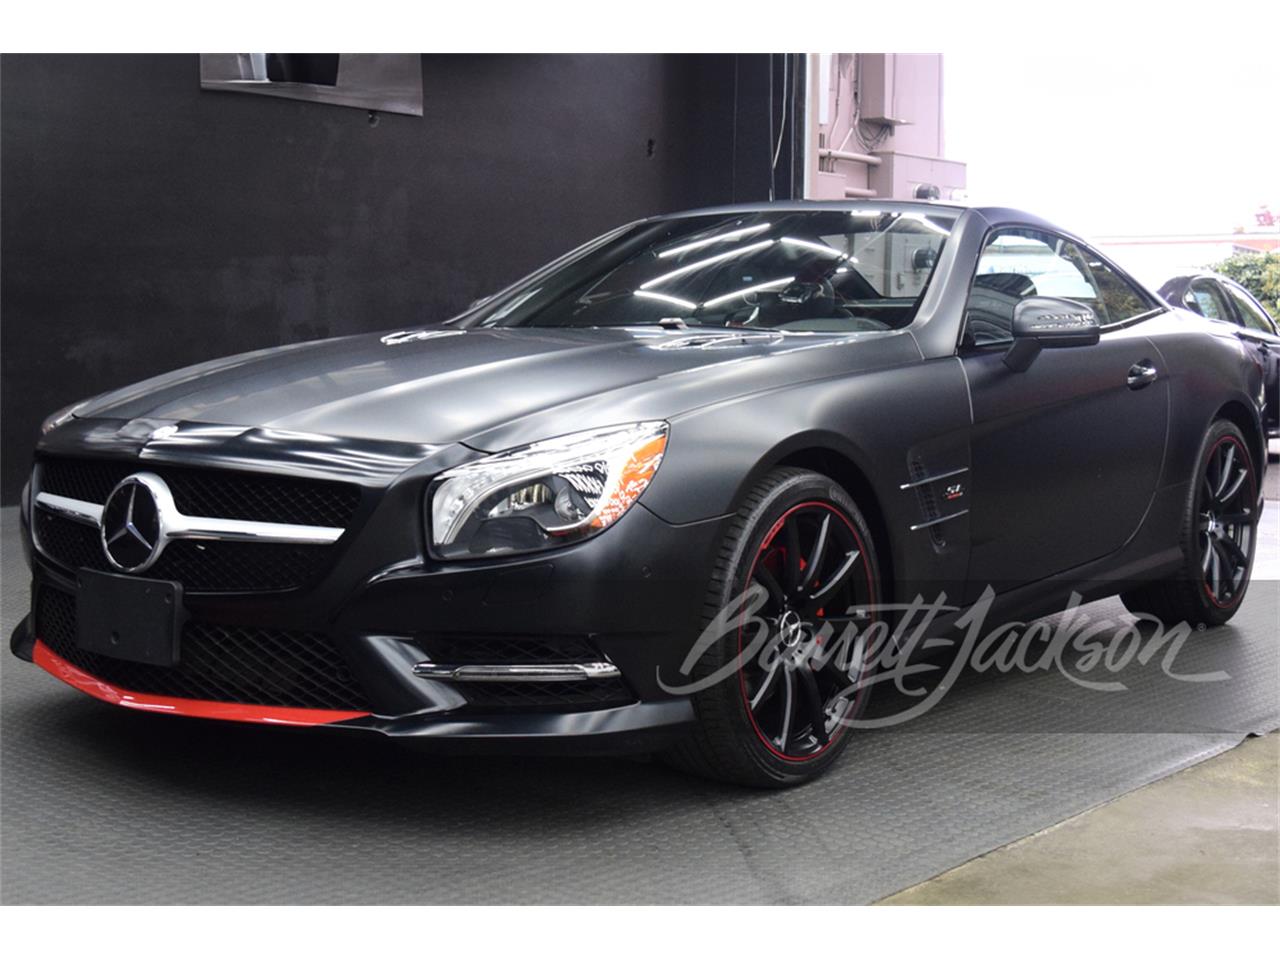 For Sale at Auction: 2016 Mercedes-Benz SL550 in Scottsdale, Arizona for sale in Scottsdale, AZ